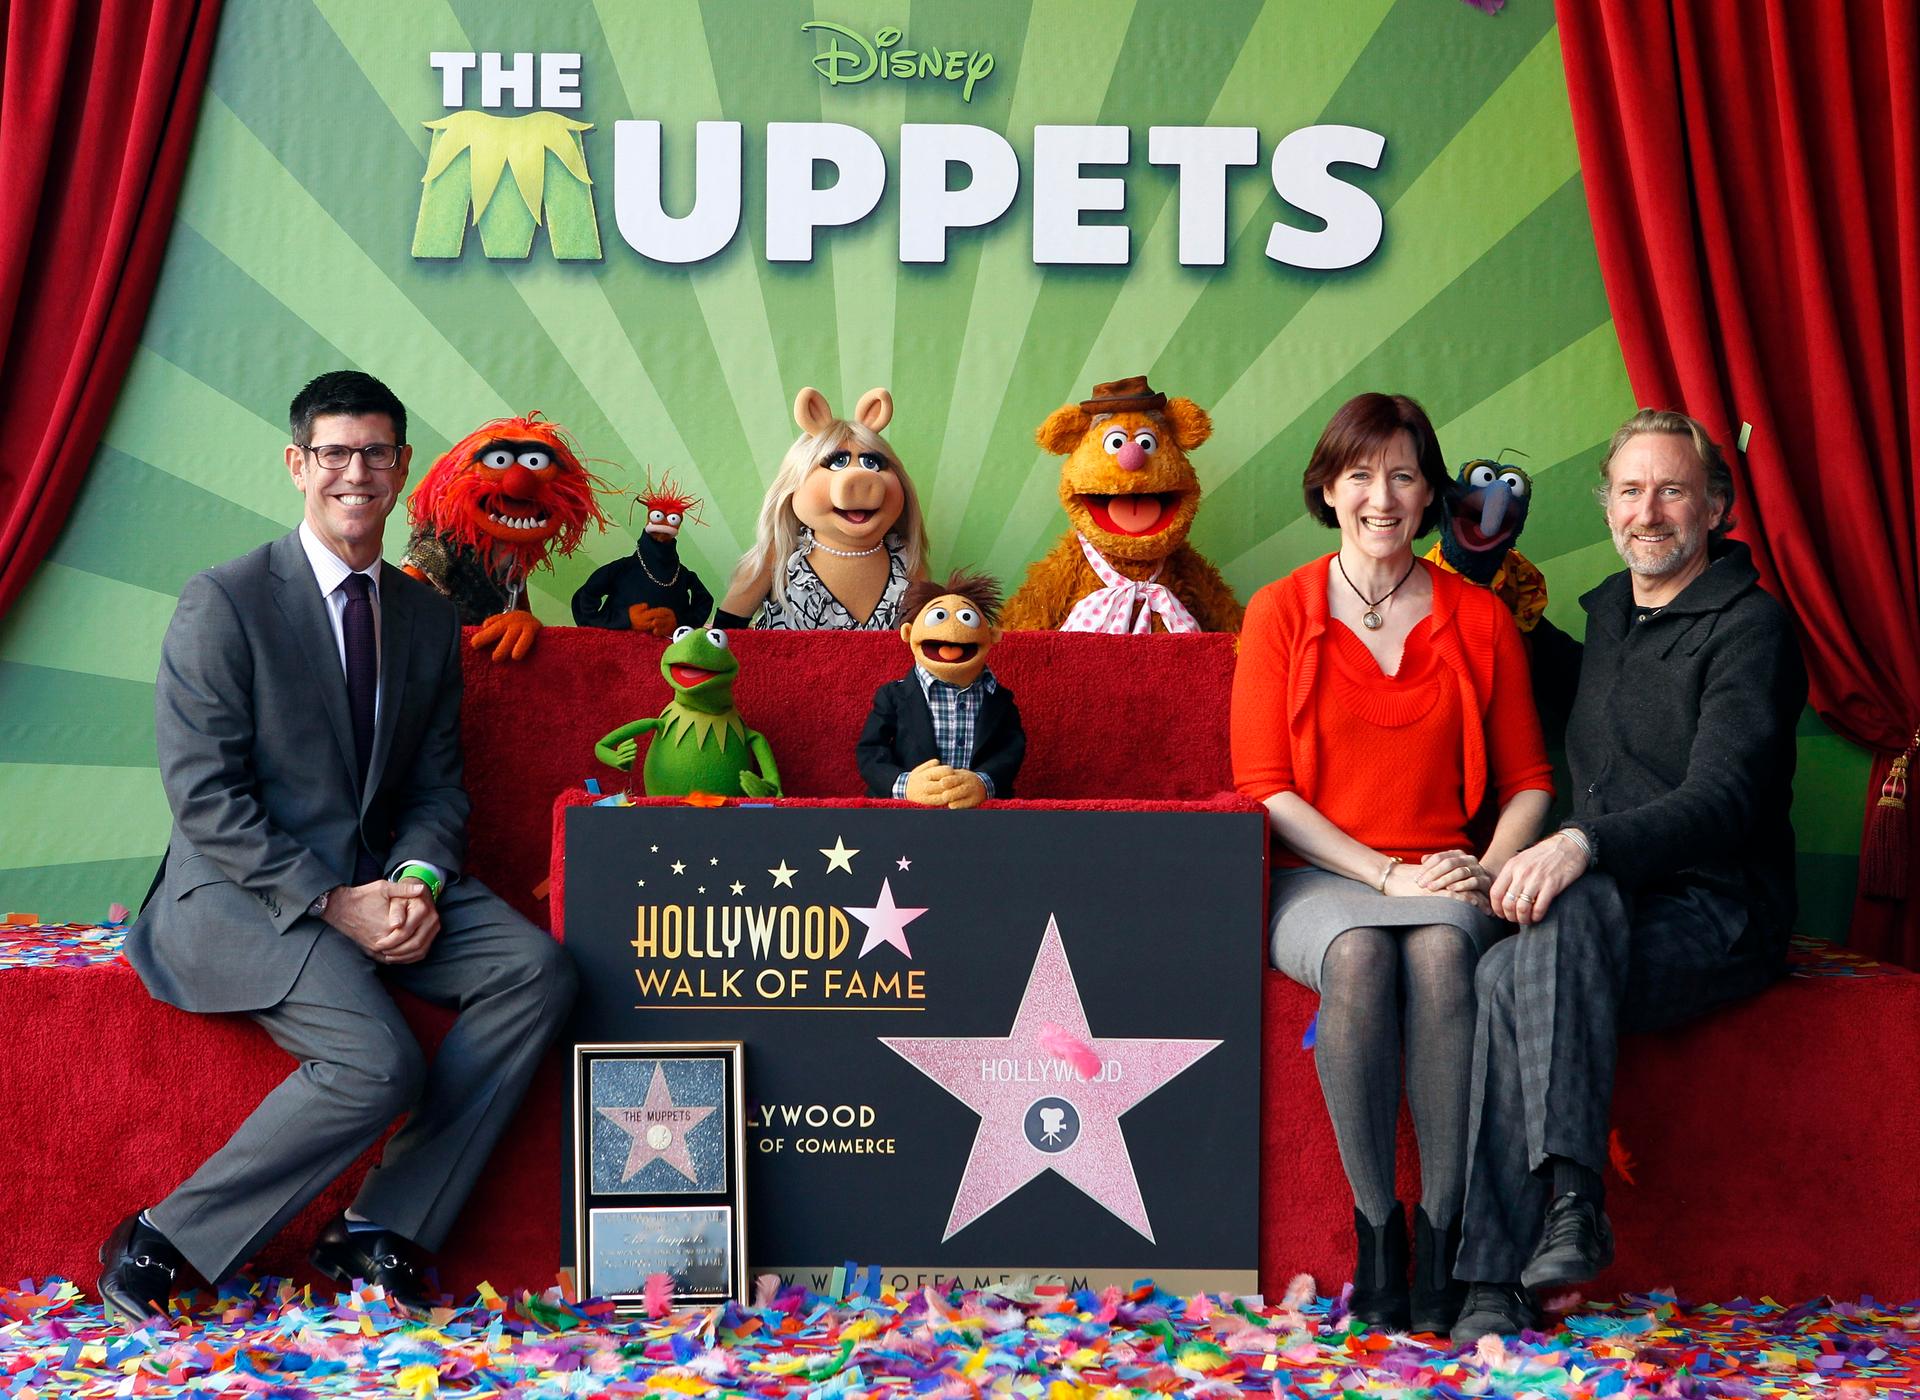 Rich Ross, Lisa Henson, CEO of The Jim Henson Company, and her brother Brian Henson and the muppets